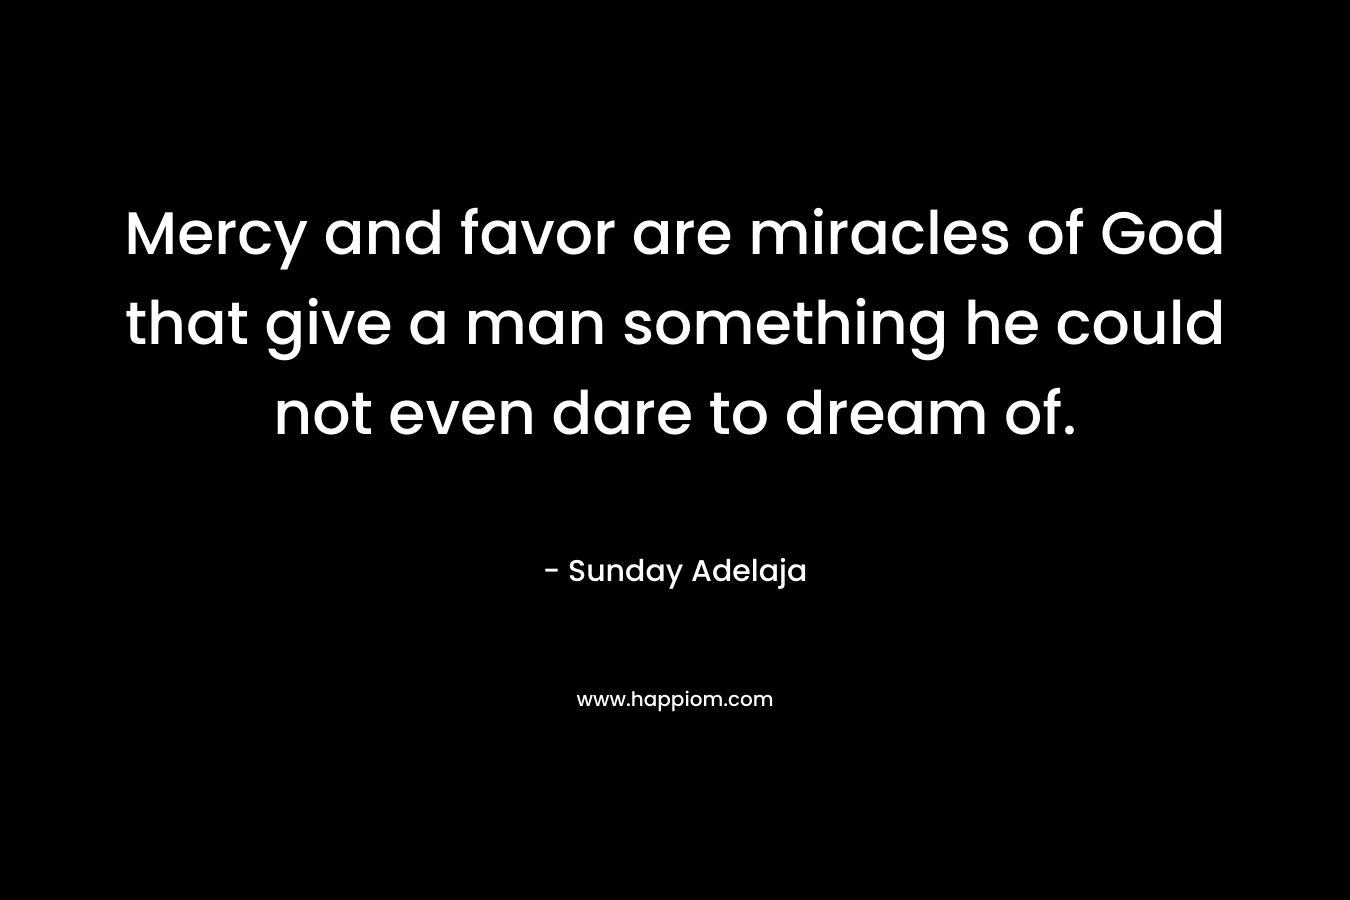 Mercy and favor are miracles of God that give a man something he could not even dare to dream of.